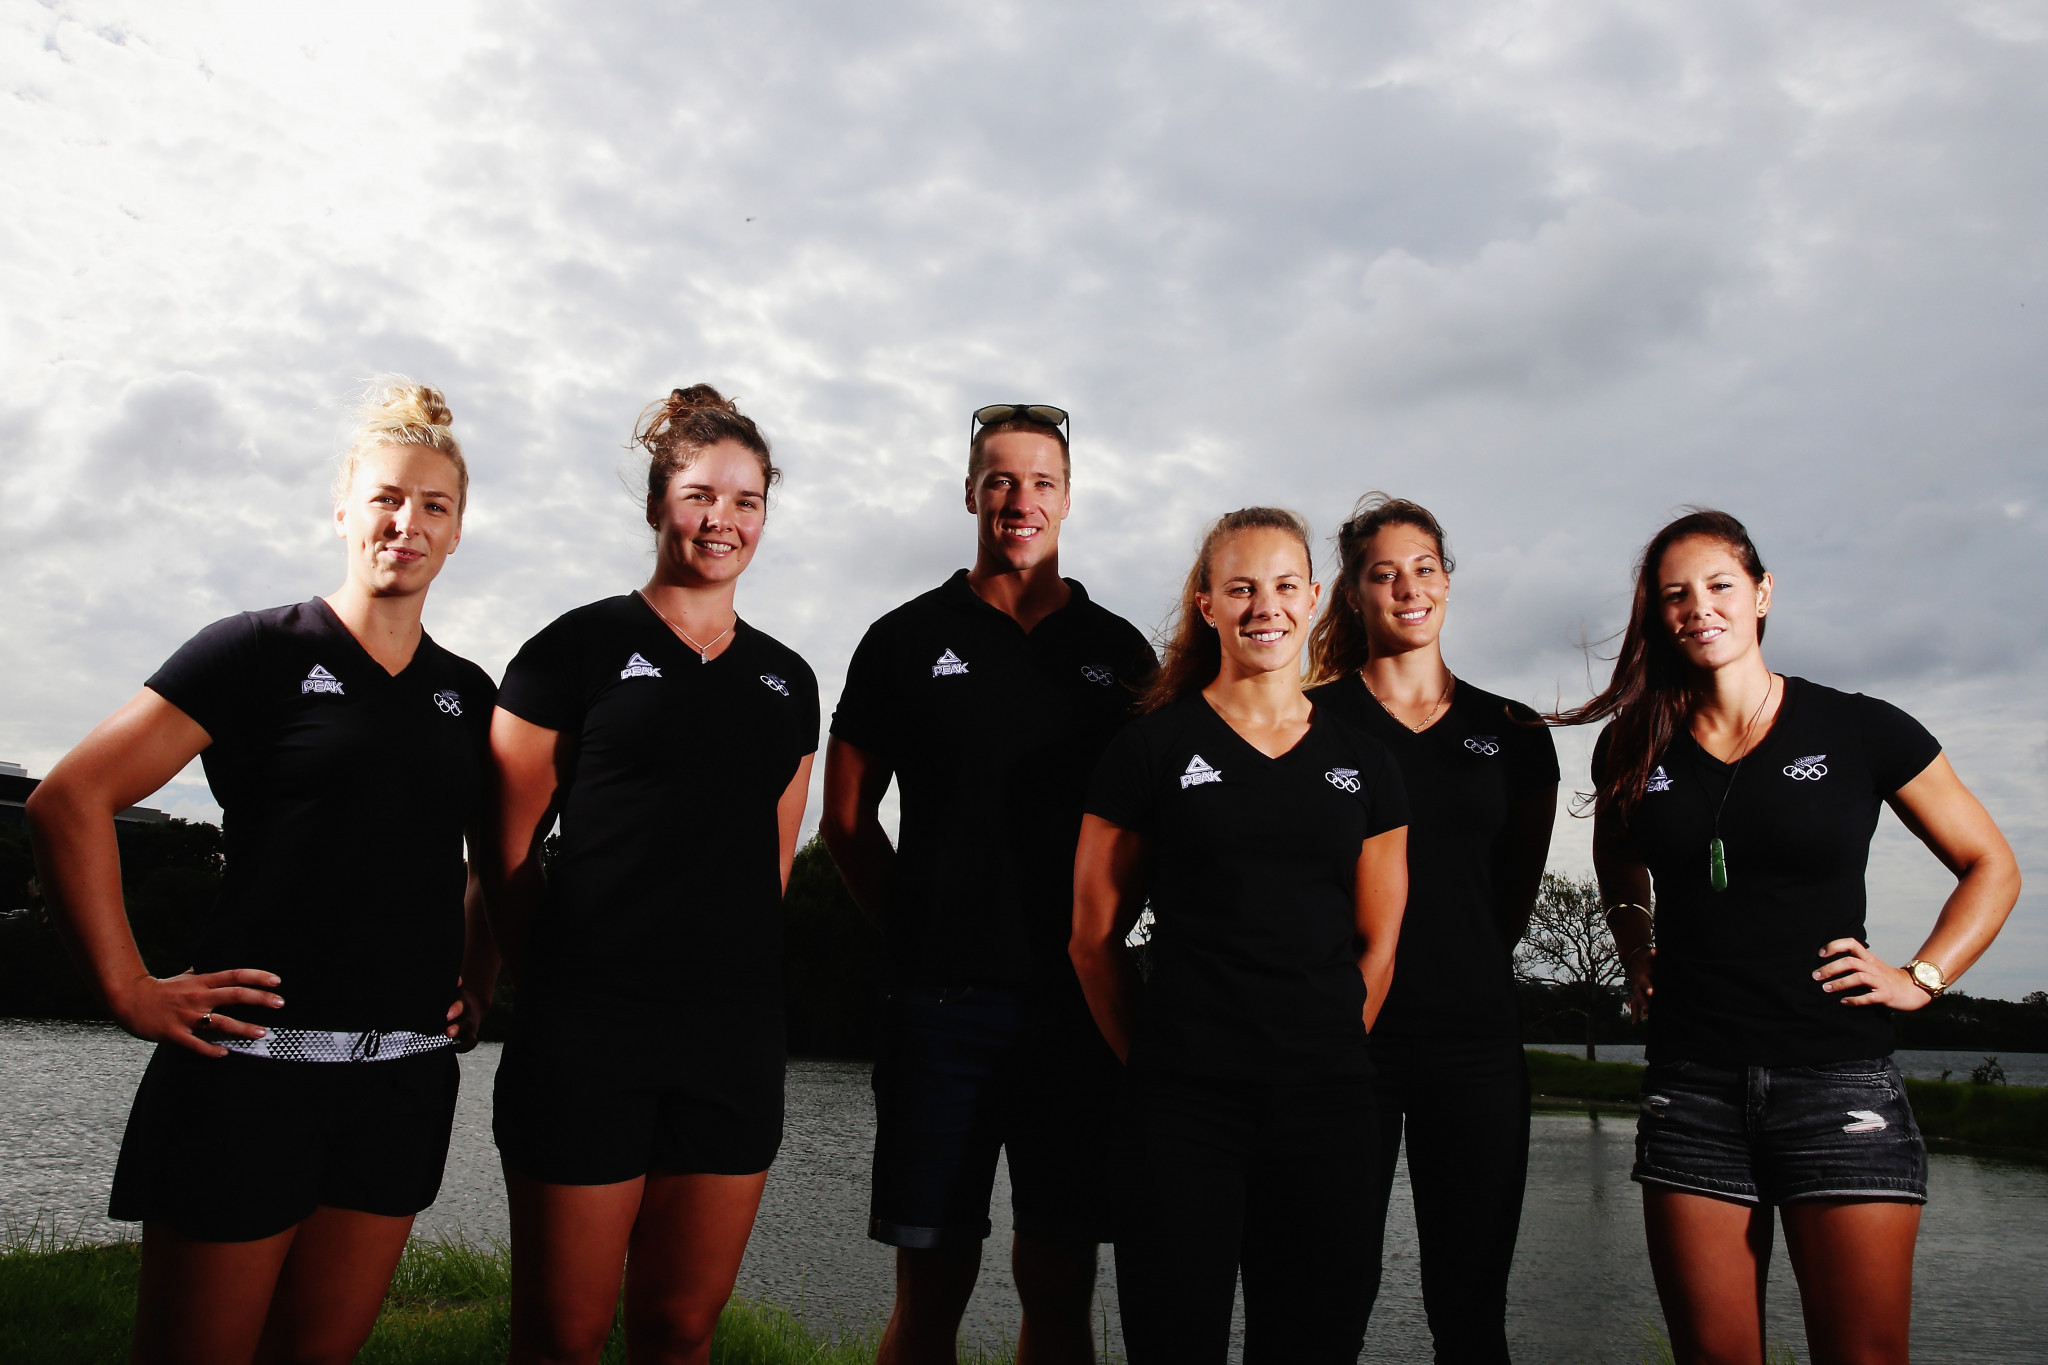 New Zealand and Spain scoop double gold at ICF Canoe Sprint World Cup